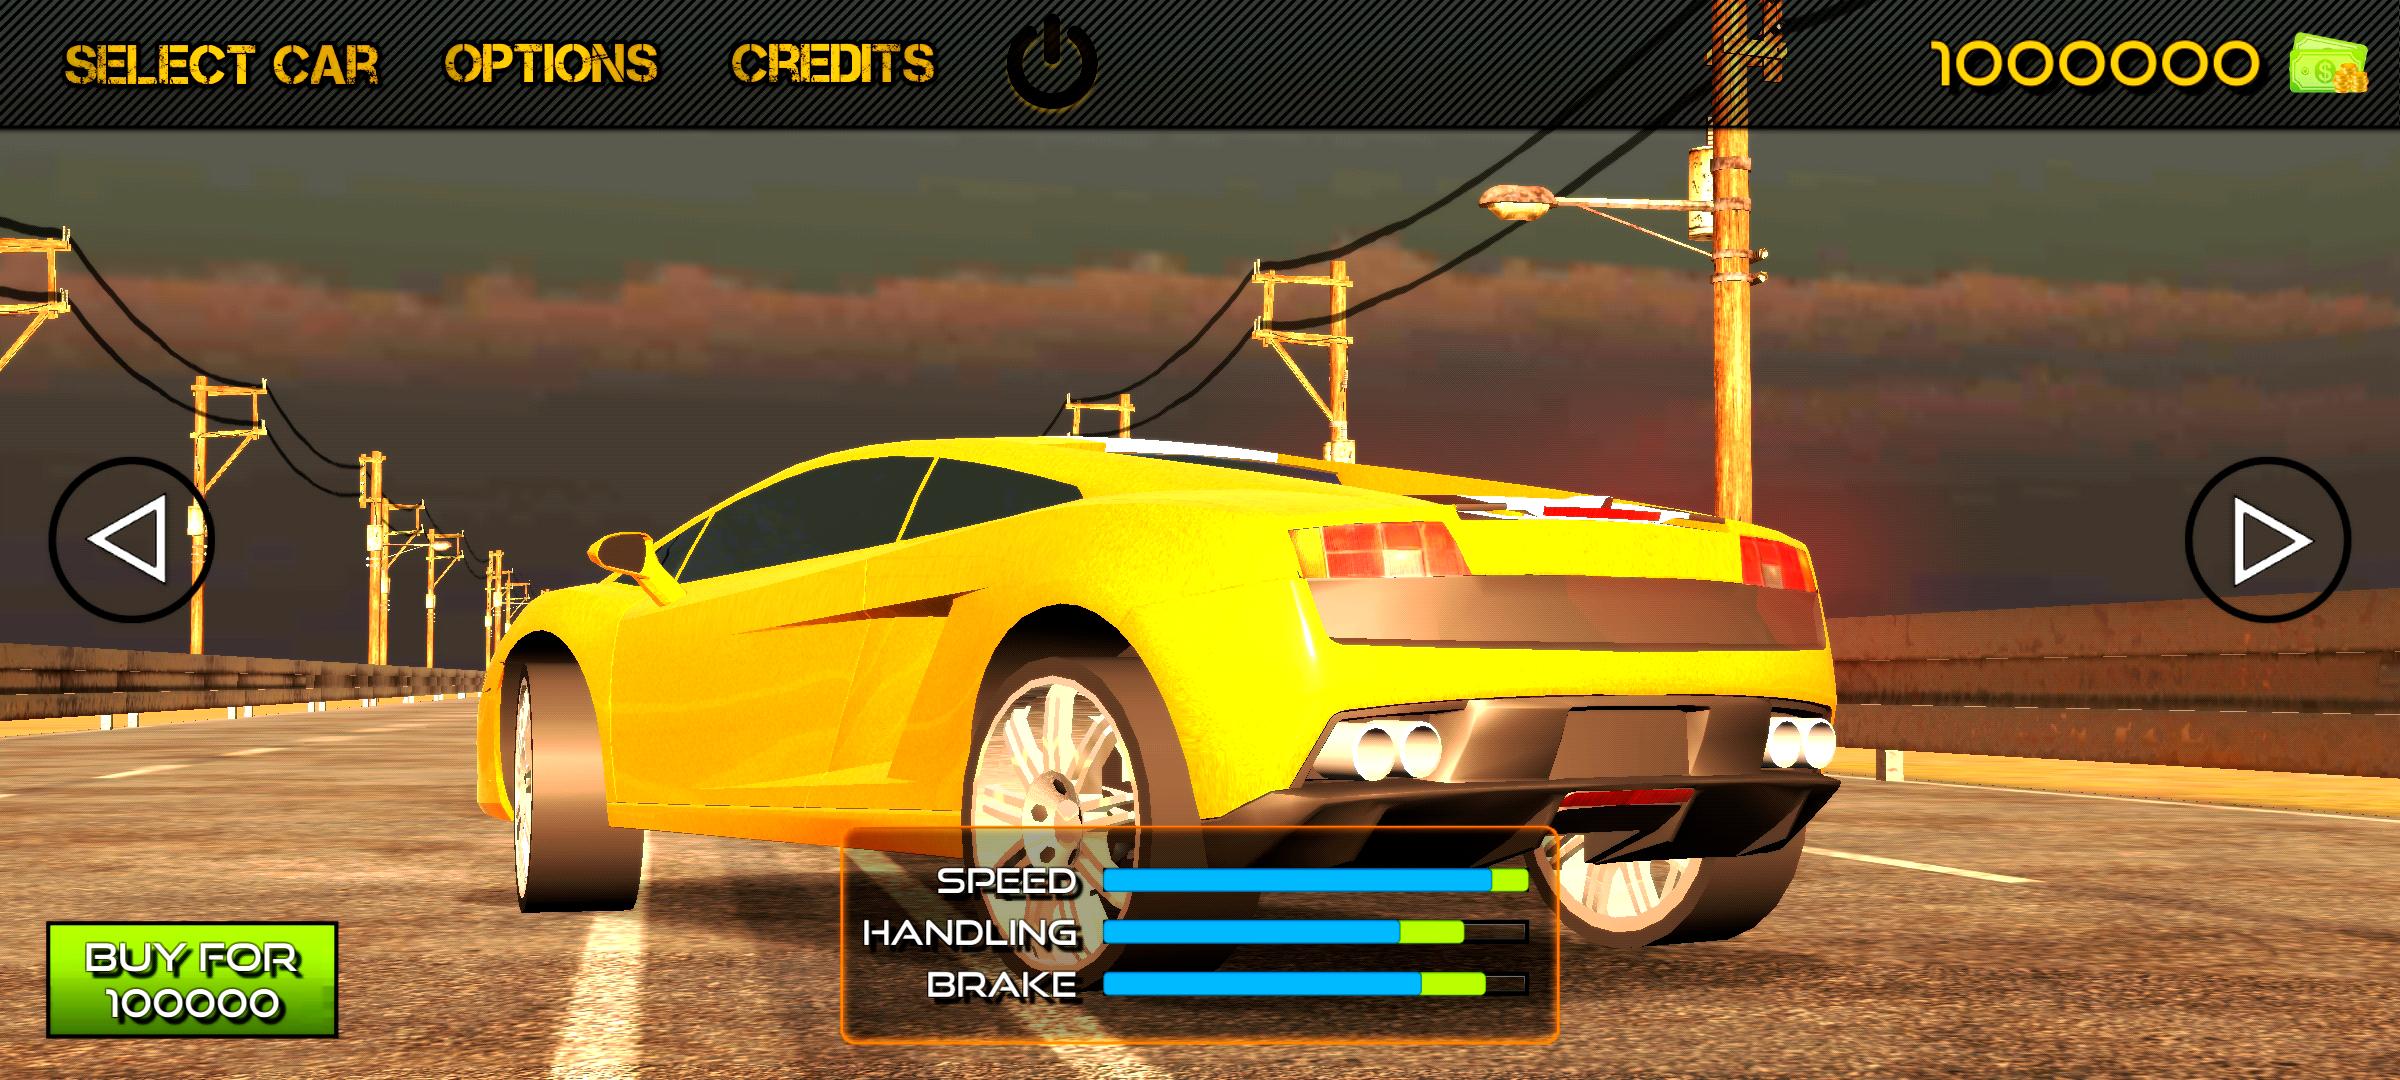 Download Rebel Racing - Car Games android on PC